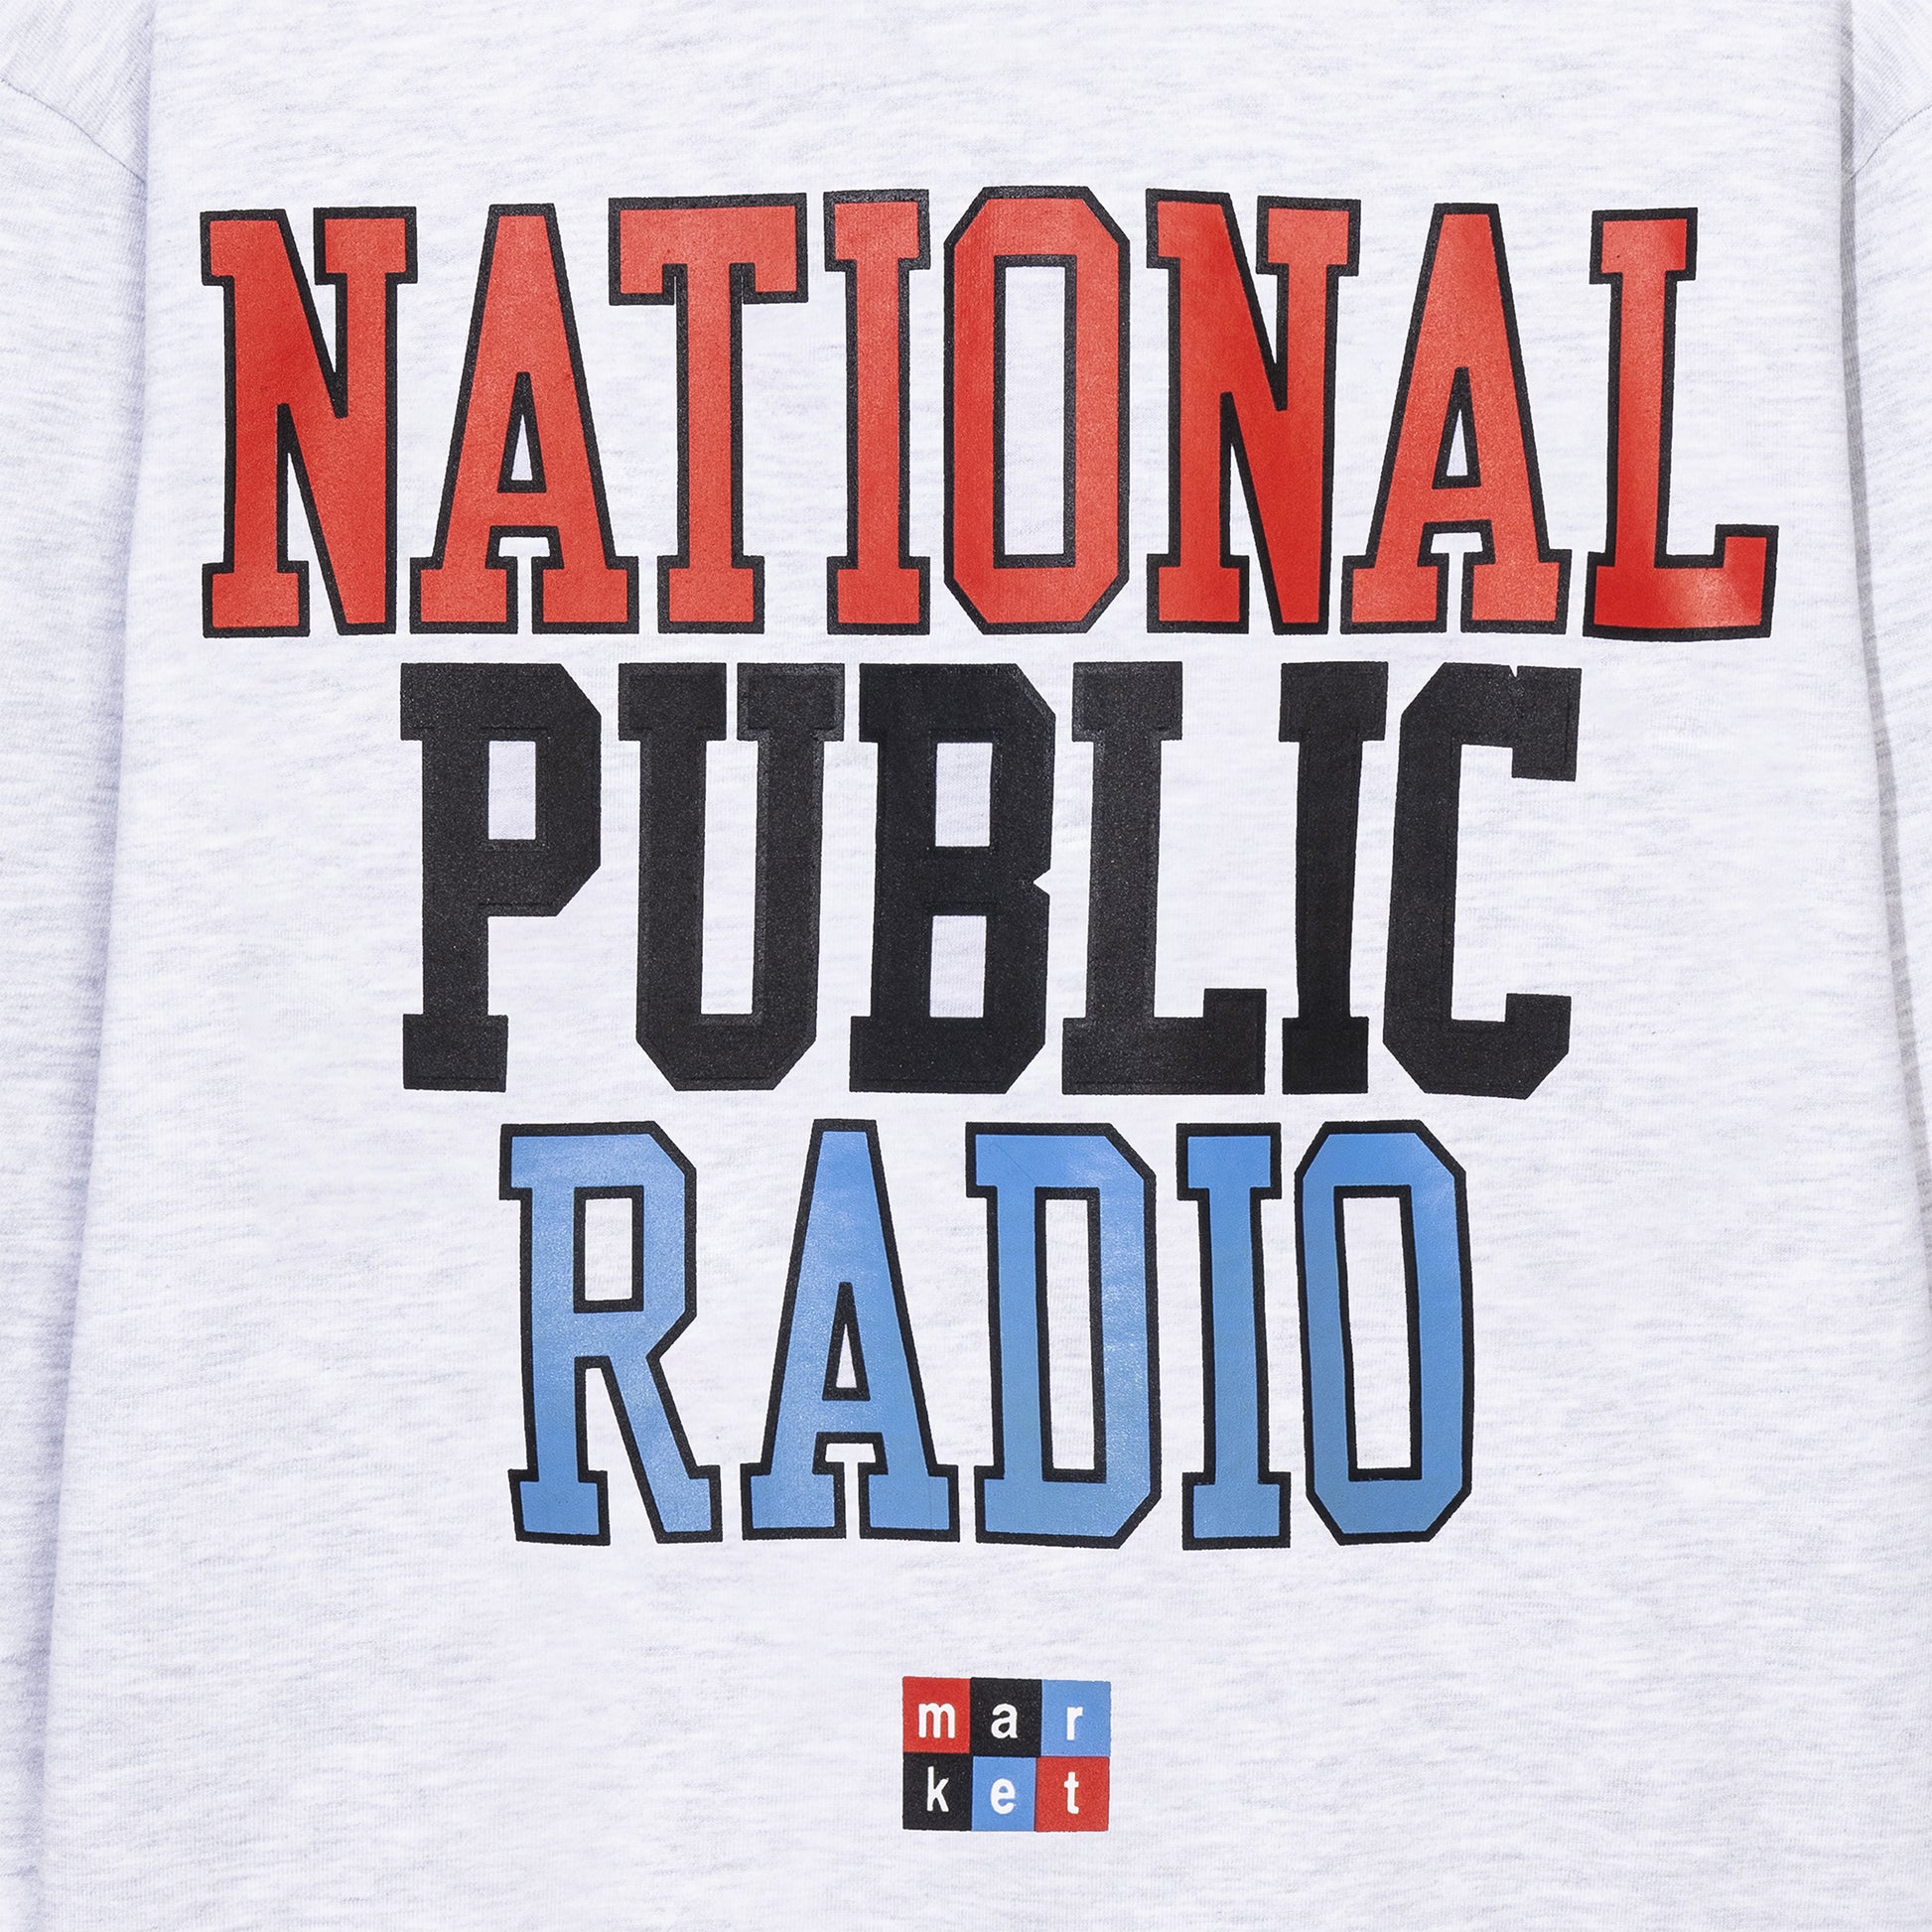 MARKET clothing brand NPR FACTS CREWNECK SWEATSHIRT. Find more graphic tees and hoodies at MarketStudios.com. Formally Chinatown Market.